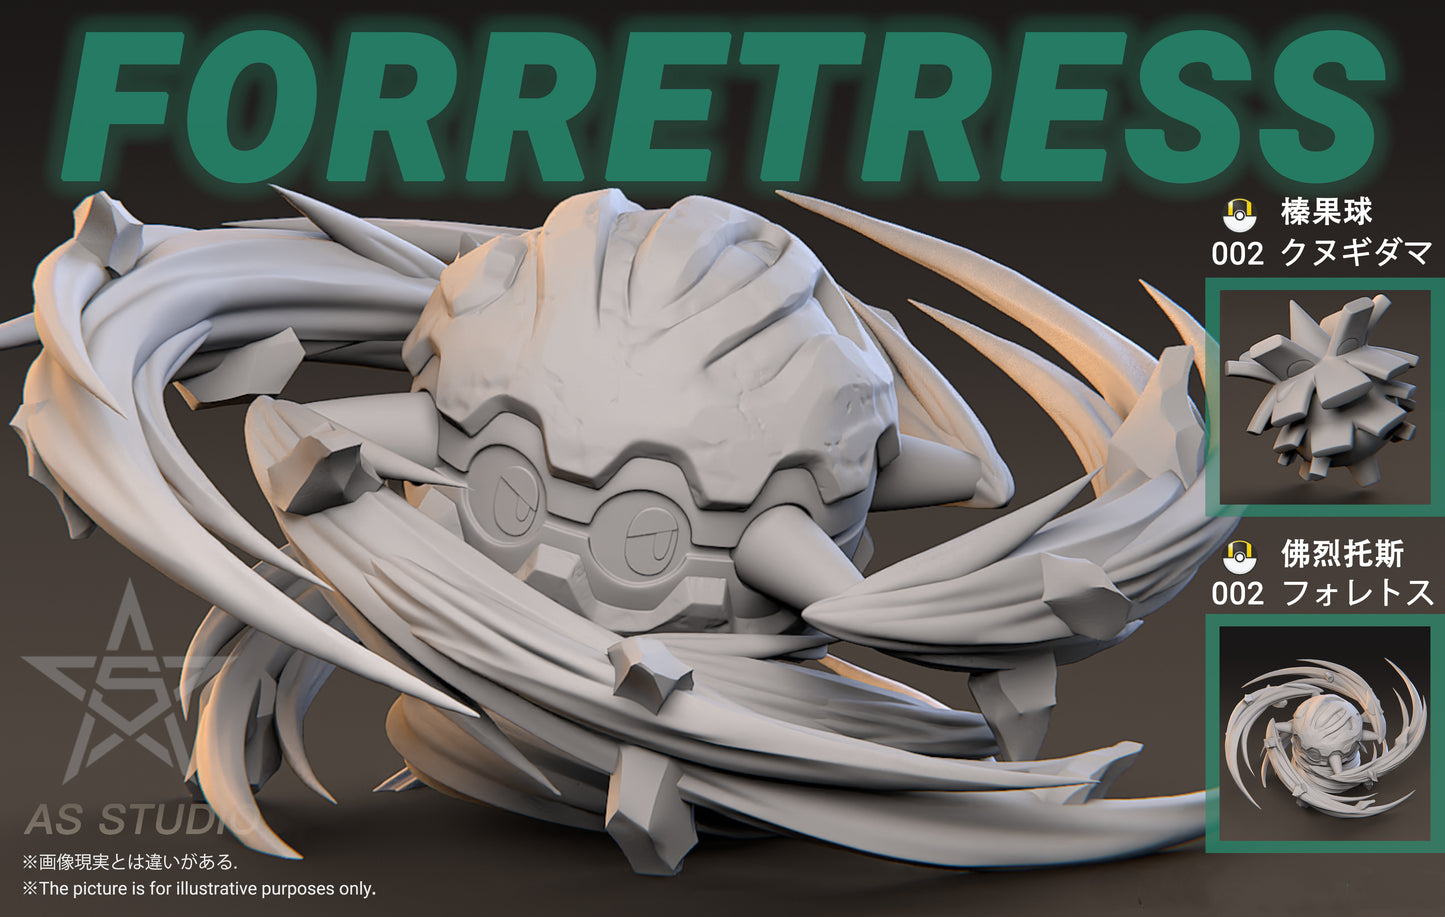 [PREORDER CLOSED] 1/20 Scale World Figure [ASTERISM] - Pineco & Forretress